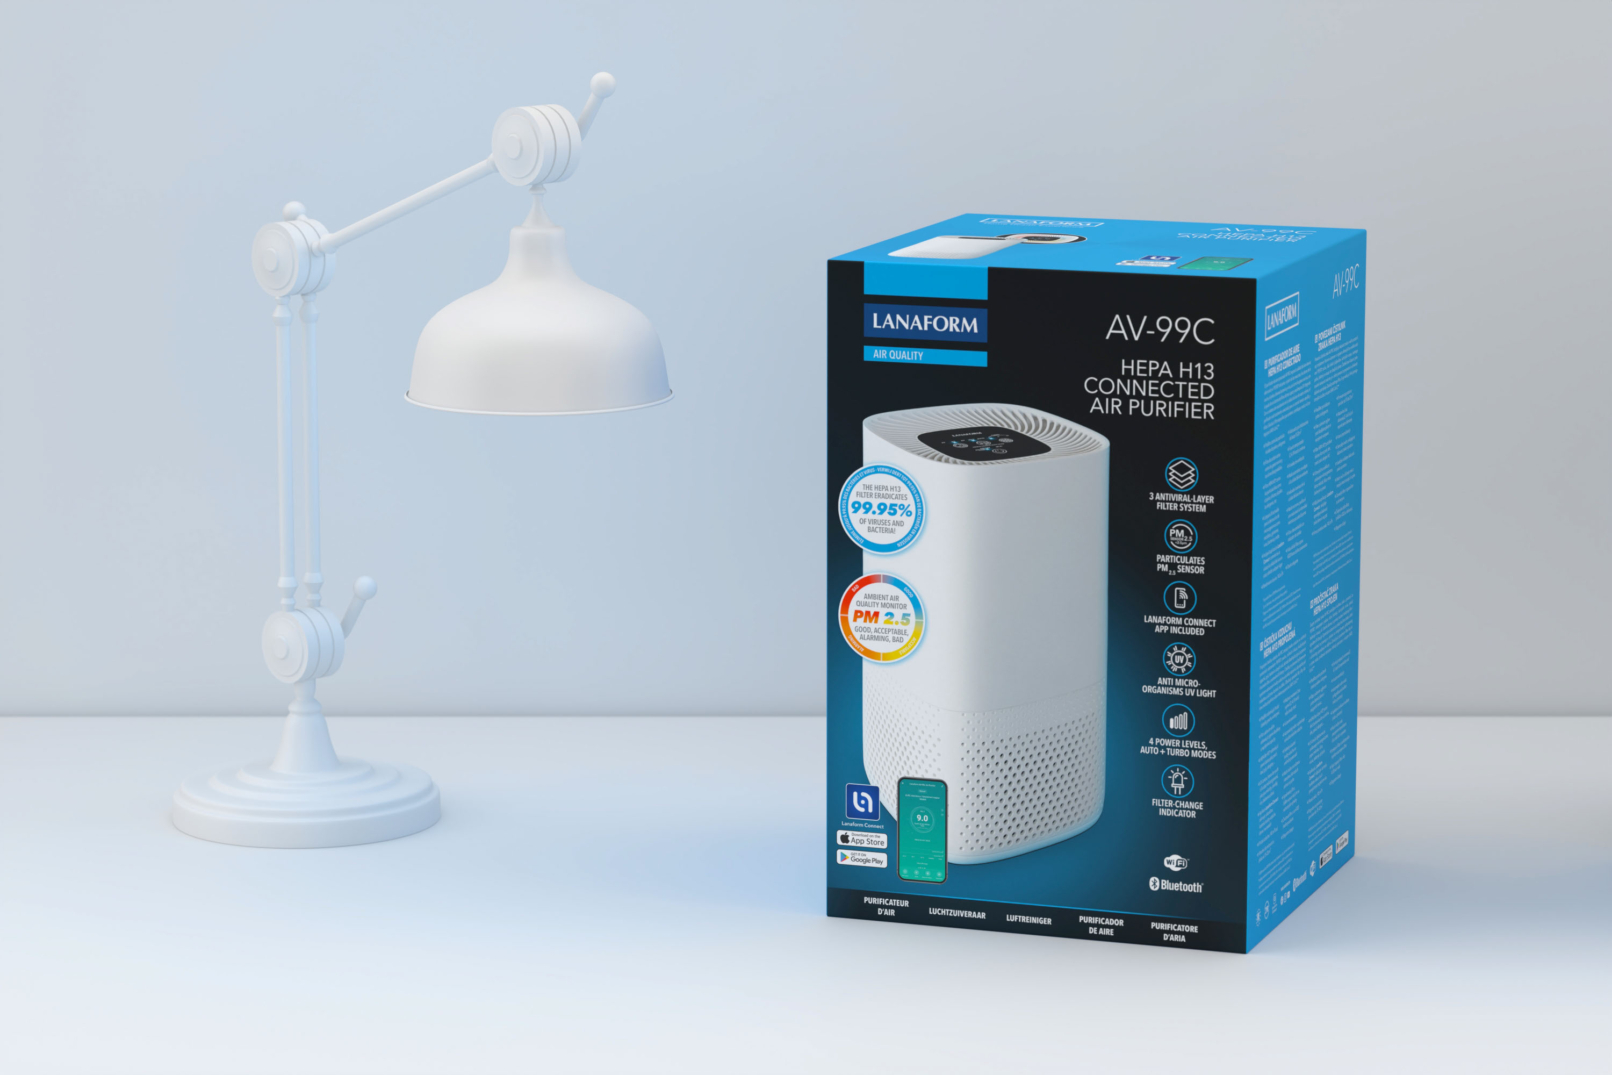 Blue packaging of the AV-99C Air Purifier on a table, next to a lamp